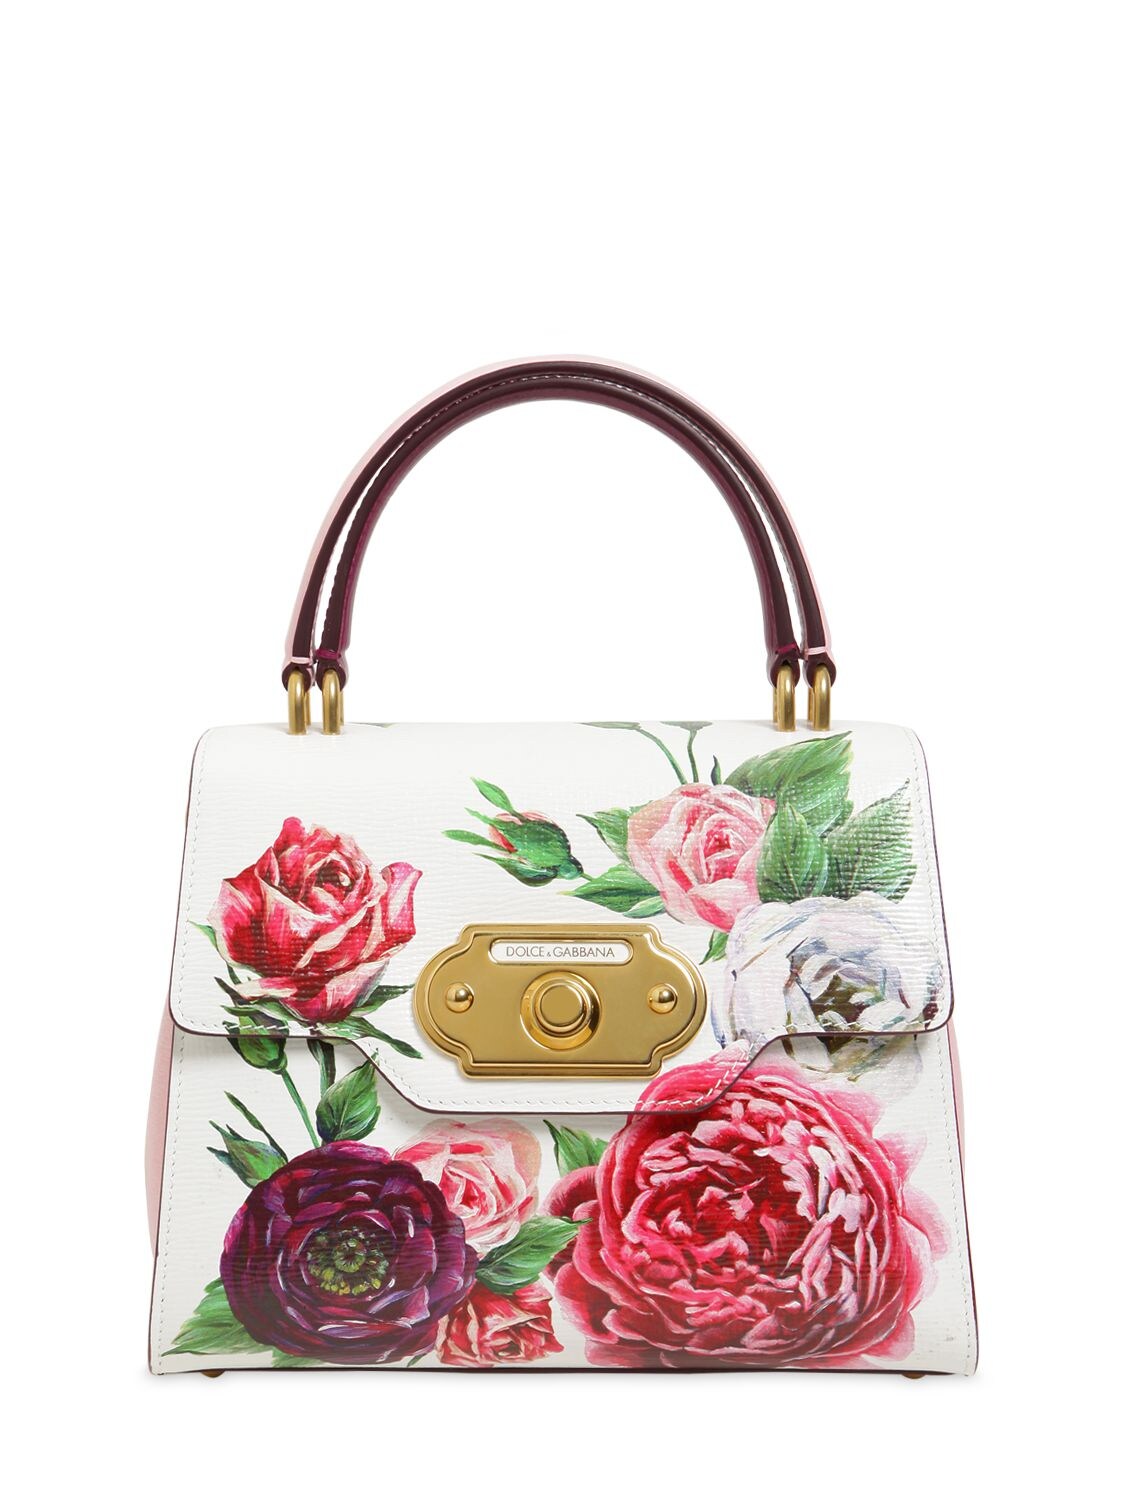 SMALL WELCOME FLORAL PRINTED BAG